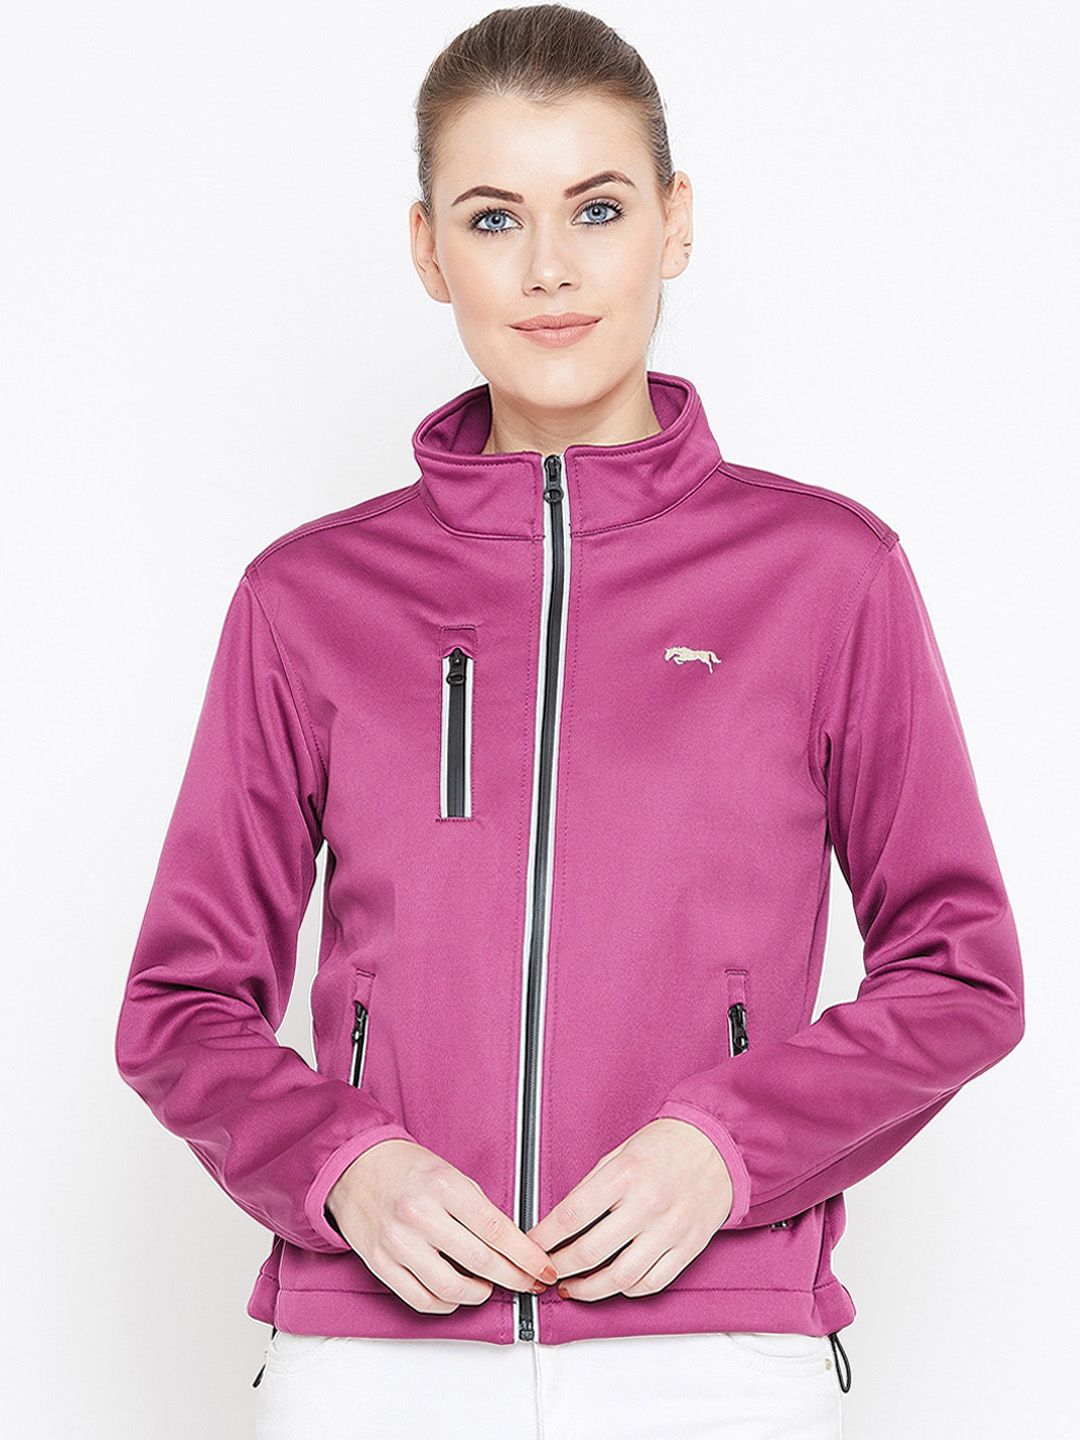 JUMP USA Women Maroon Training or Gym Tailored Jacket Price in India